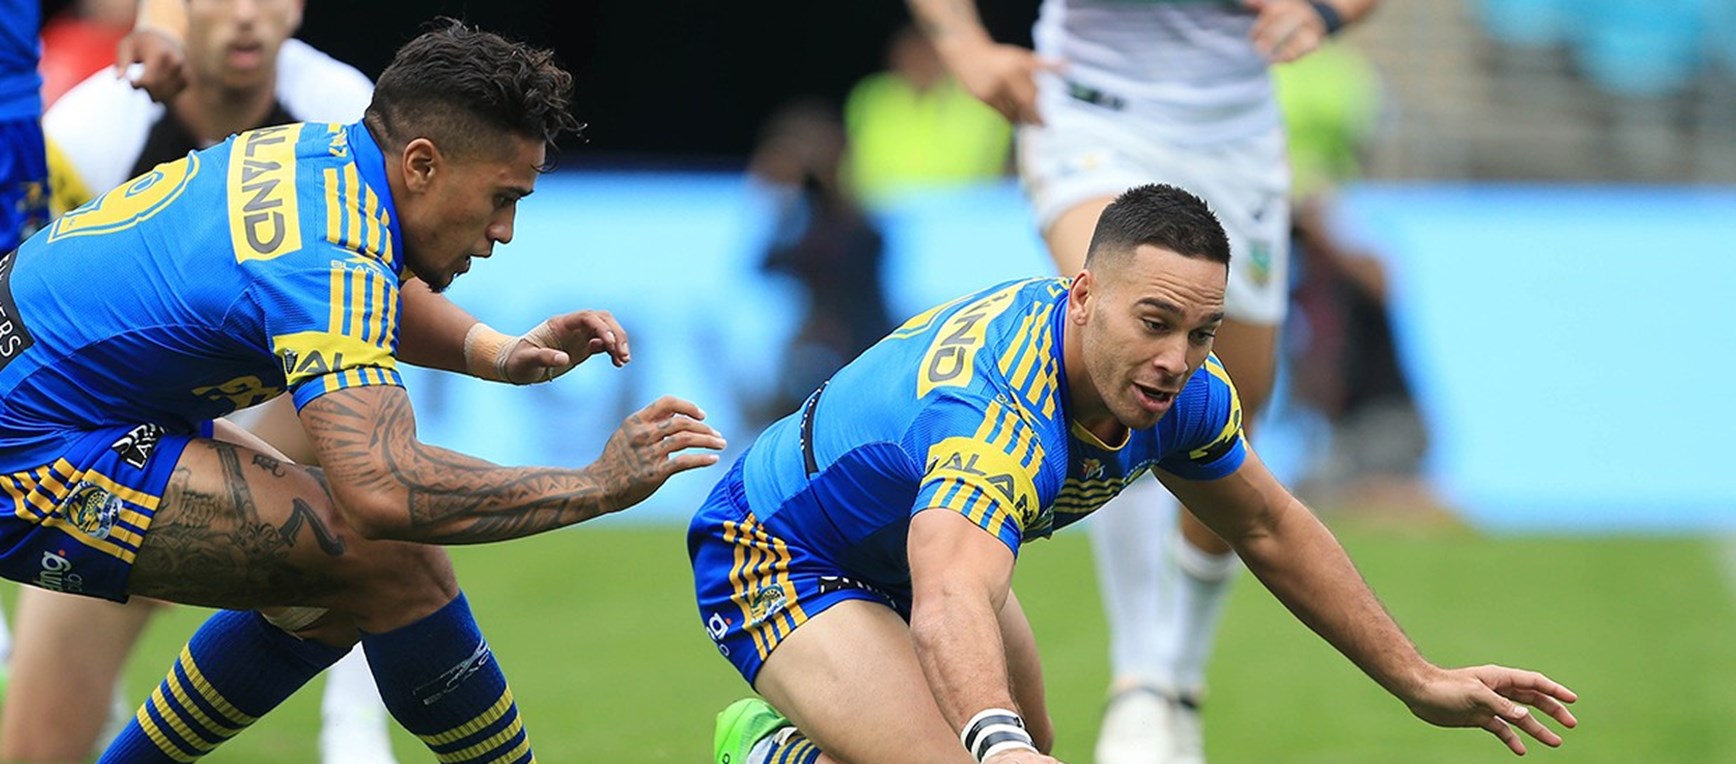 GALLERY | Eels v Penrith Panthers, ANZ Stadium